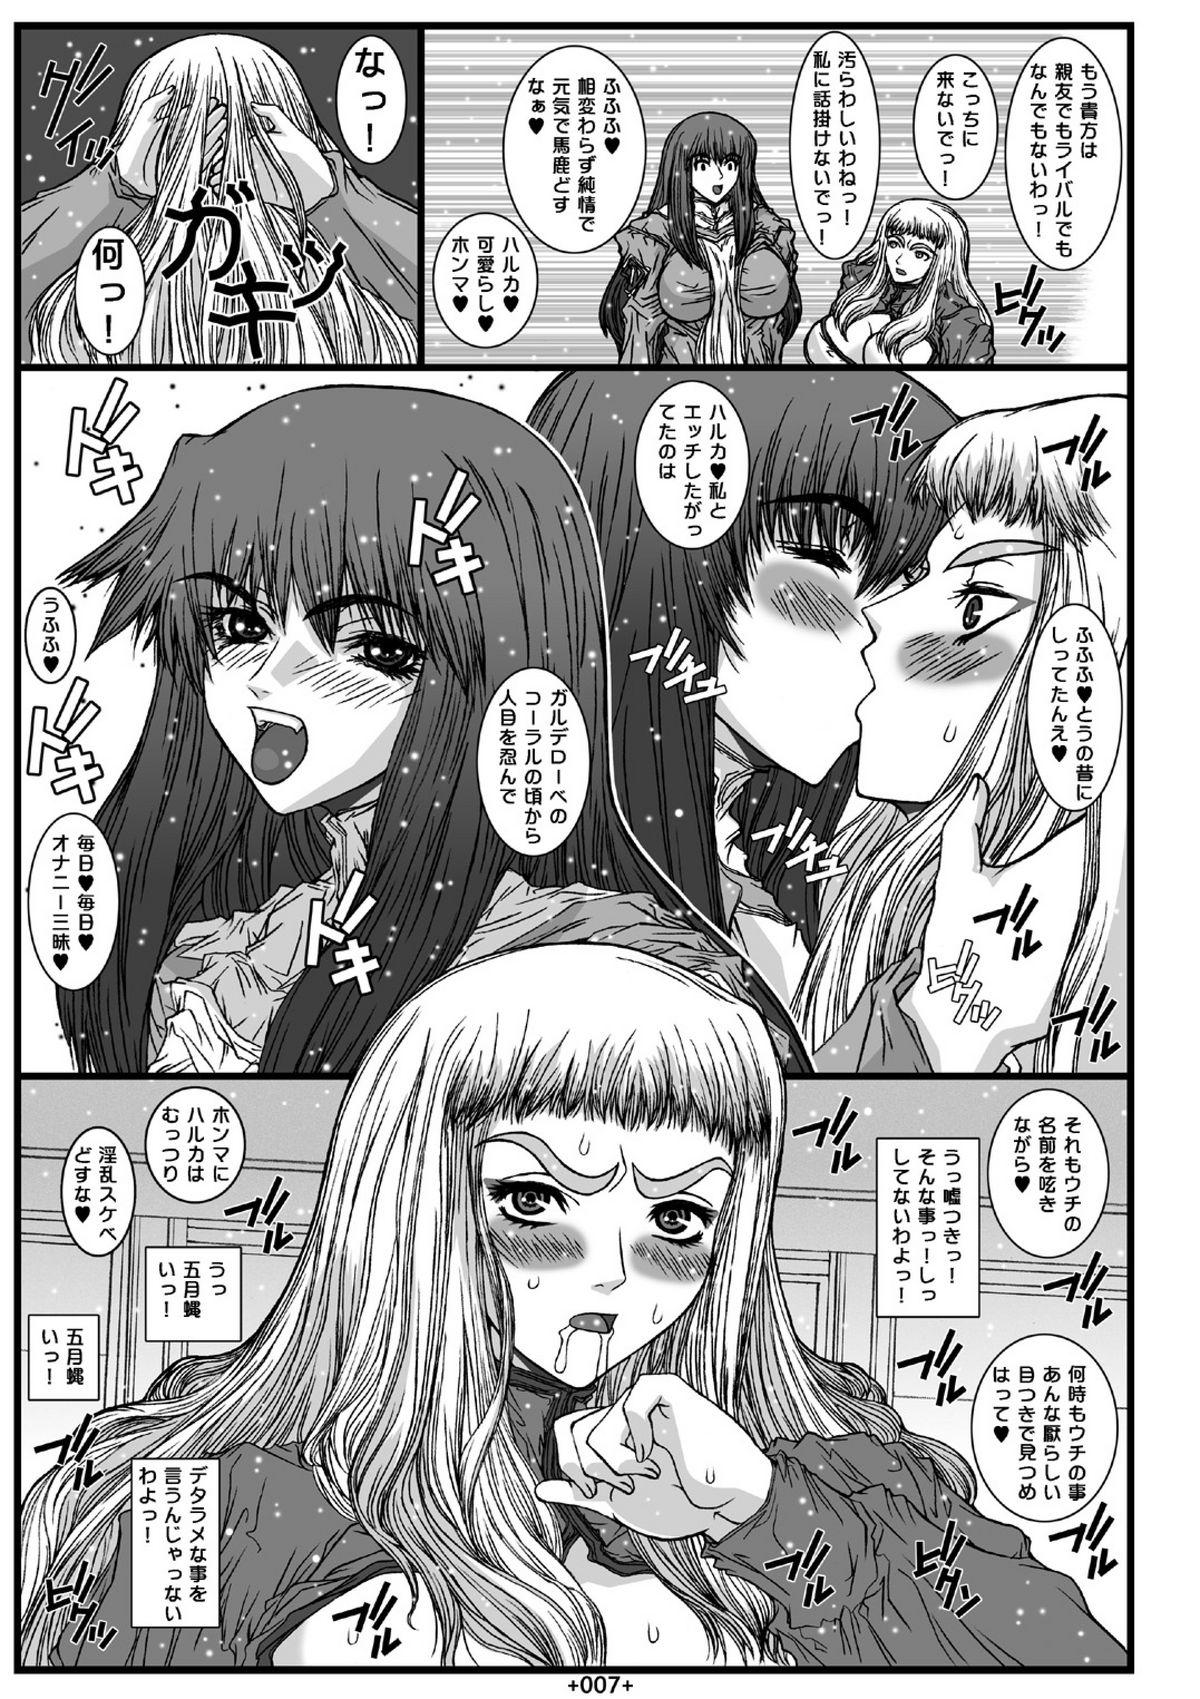 Exgirlfriend Mai-In 2 - Mai-otome Spooning - Page 9